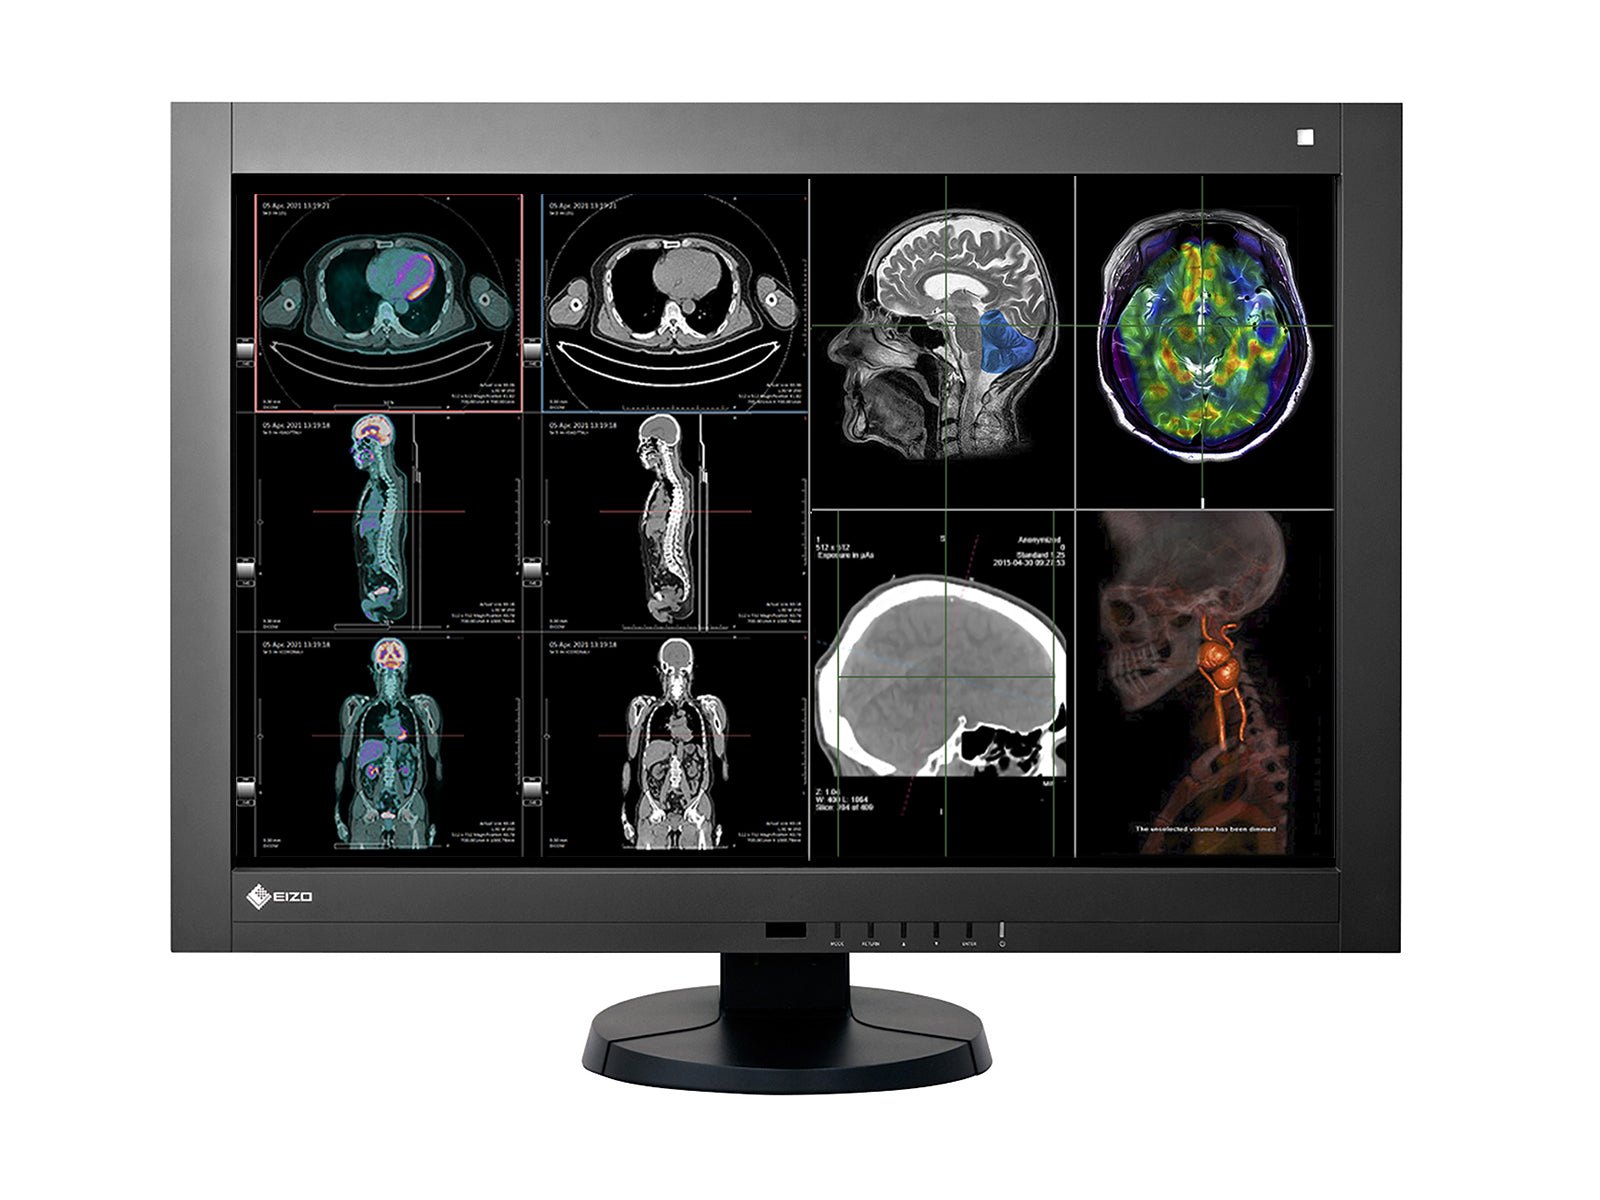 Complete PACS General Radiology Station | Eizo 4MP Color LED Displays | Dell Workstation